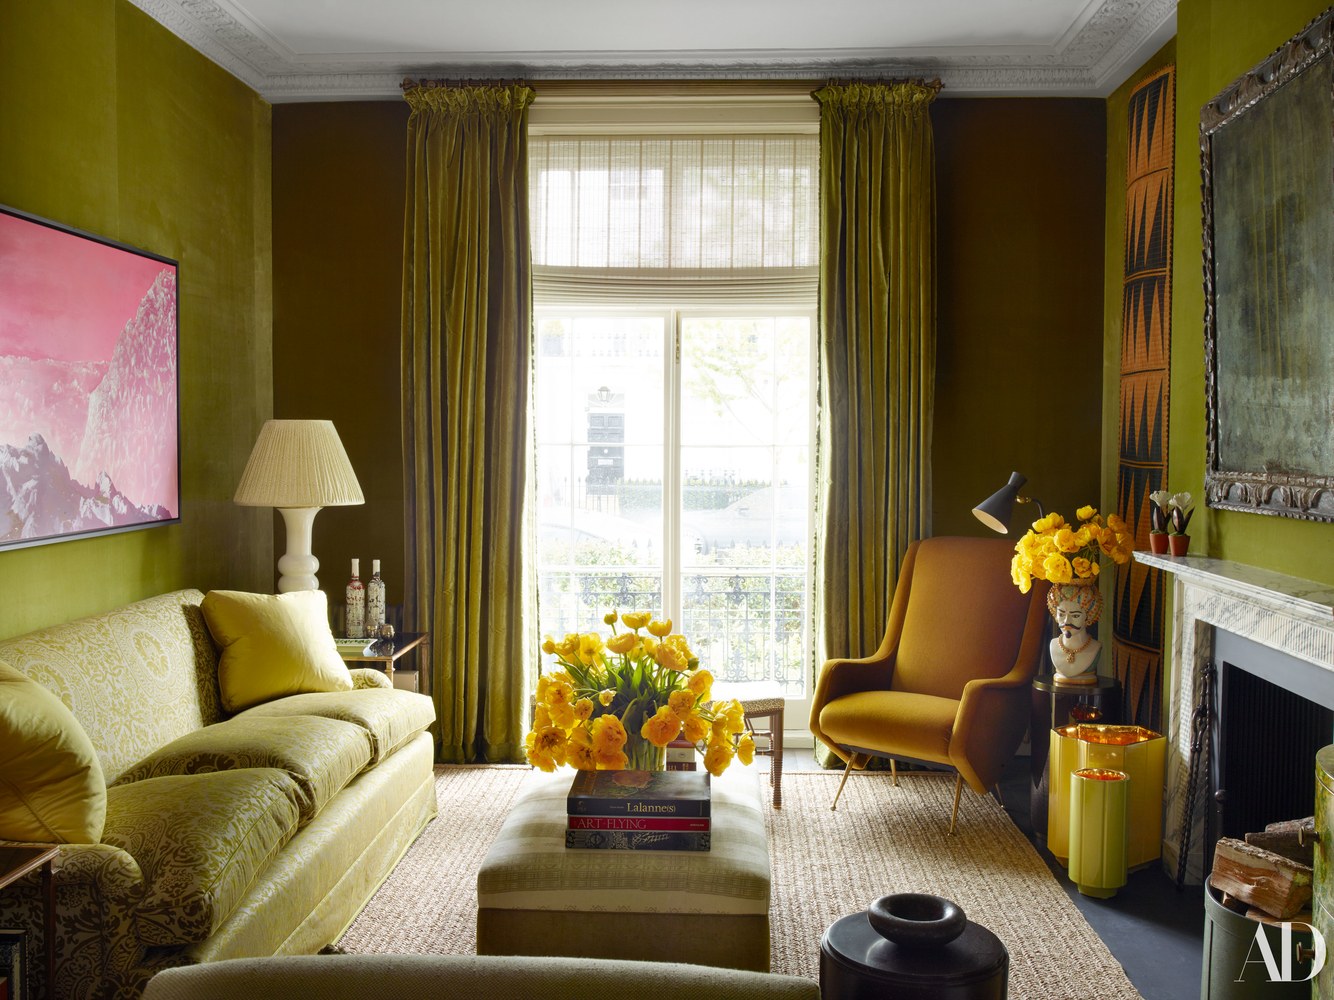 Nina Flohr's London Living Room Decorated by Veere Grenney, Fortuny Fabric sofa, green velvet upholstered walls and curtains